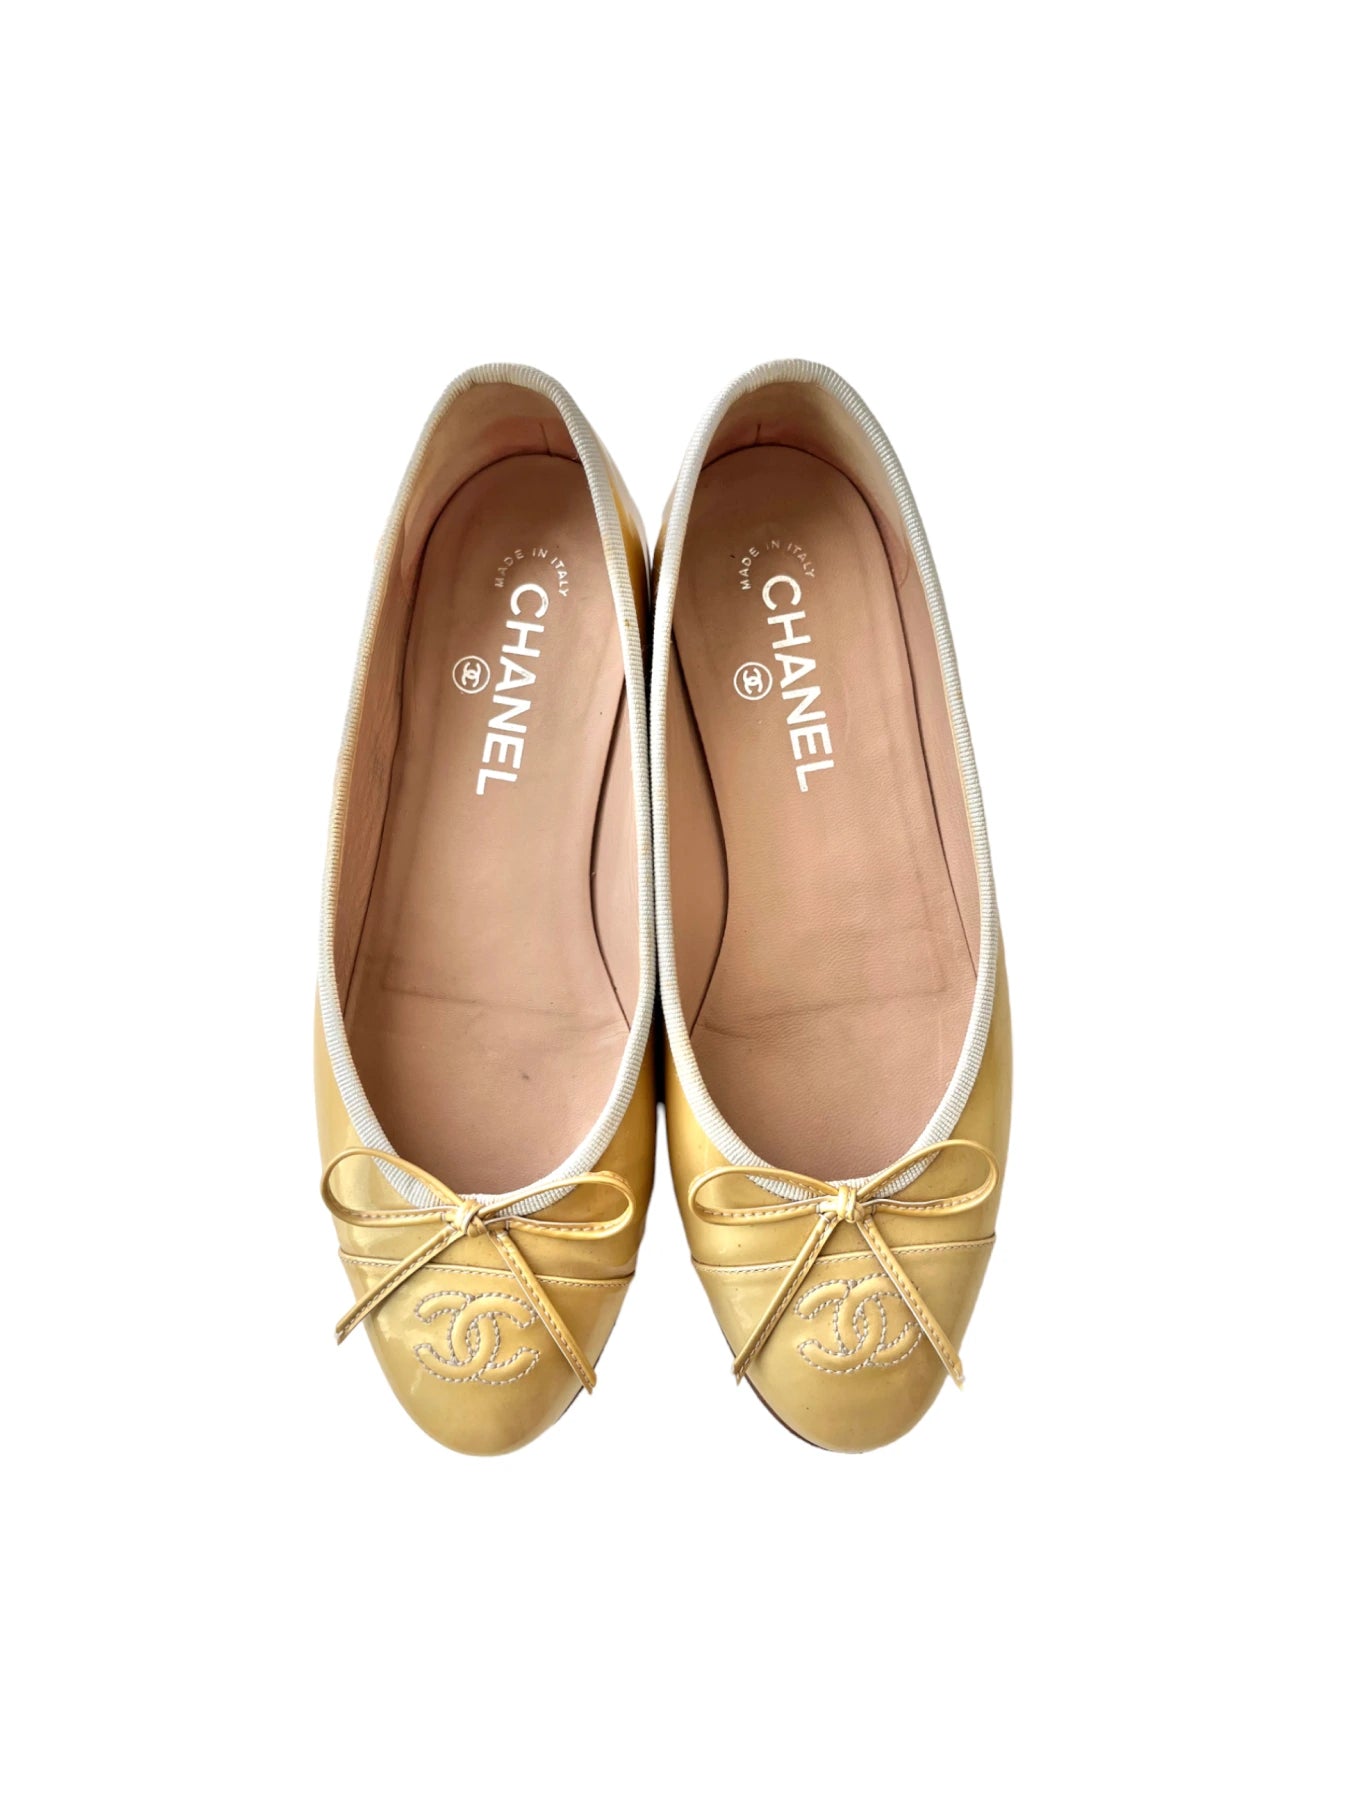 CHANEL CC Ballets Flats Yellow Patent Leather, 37